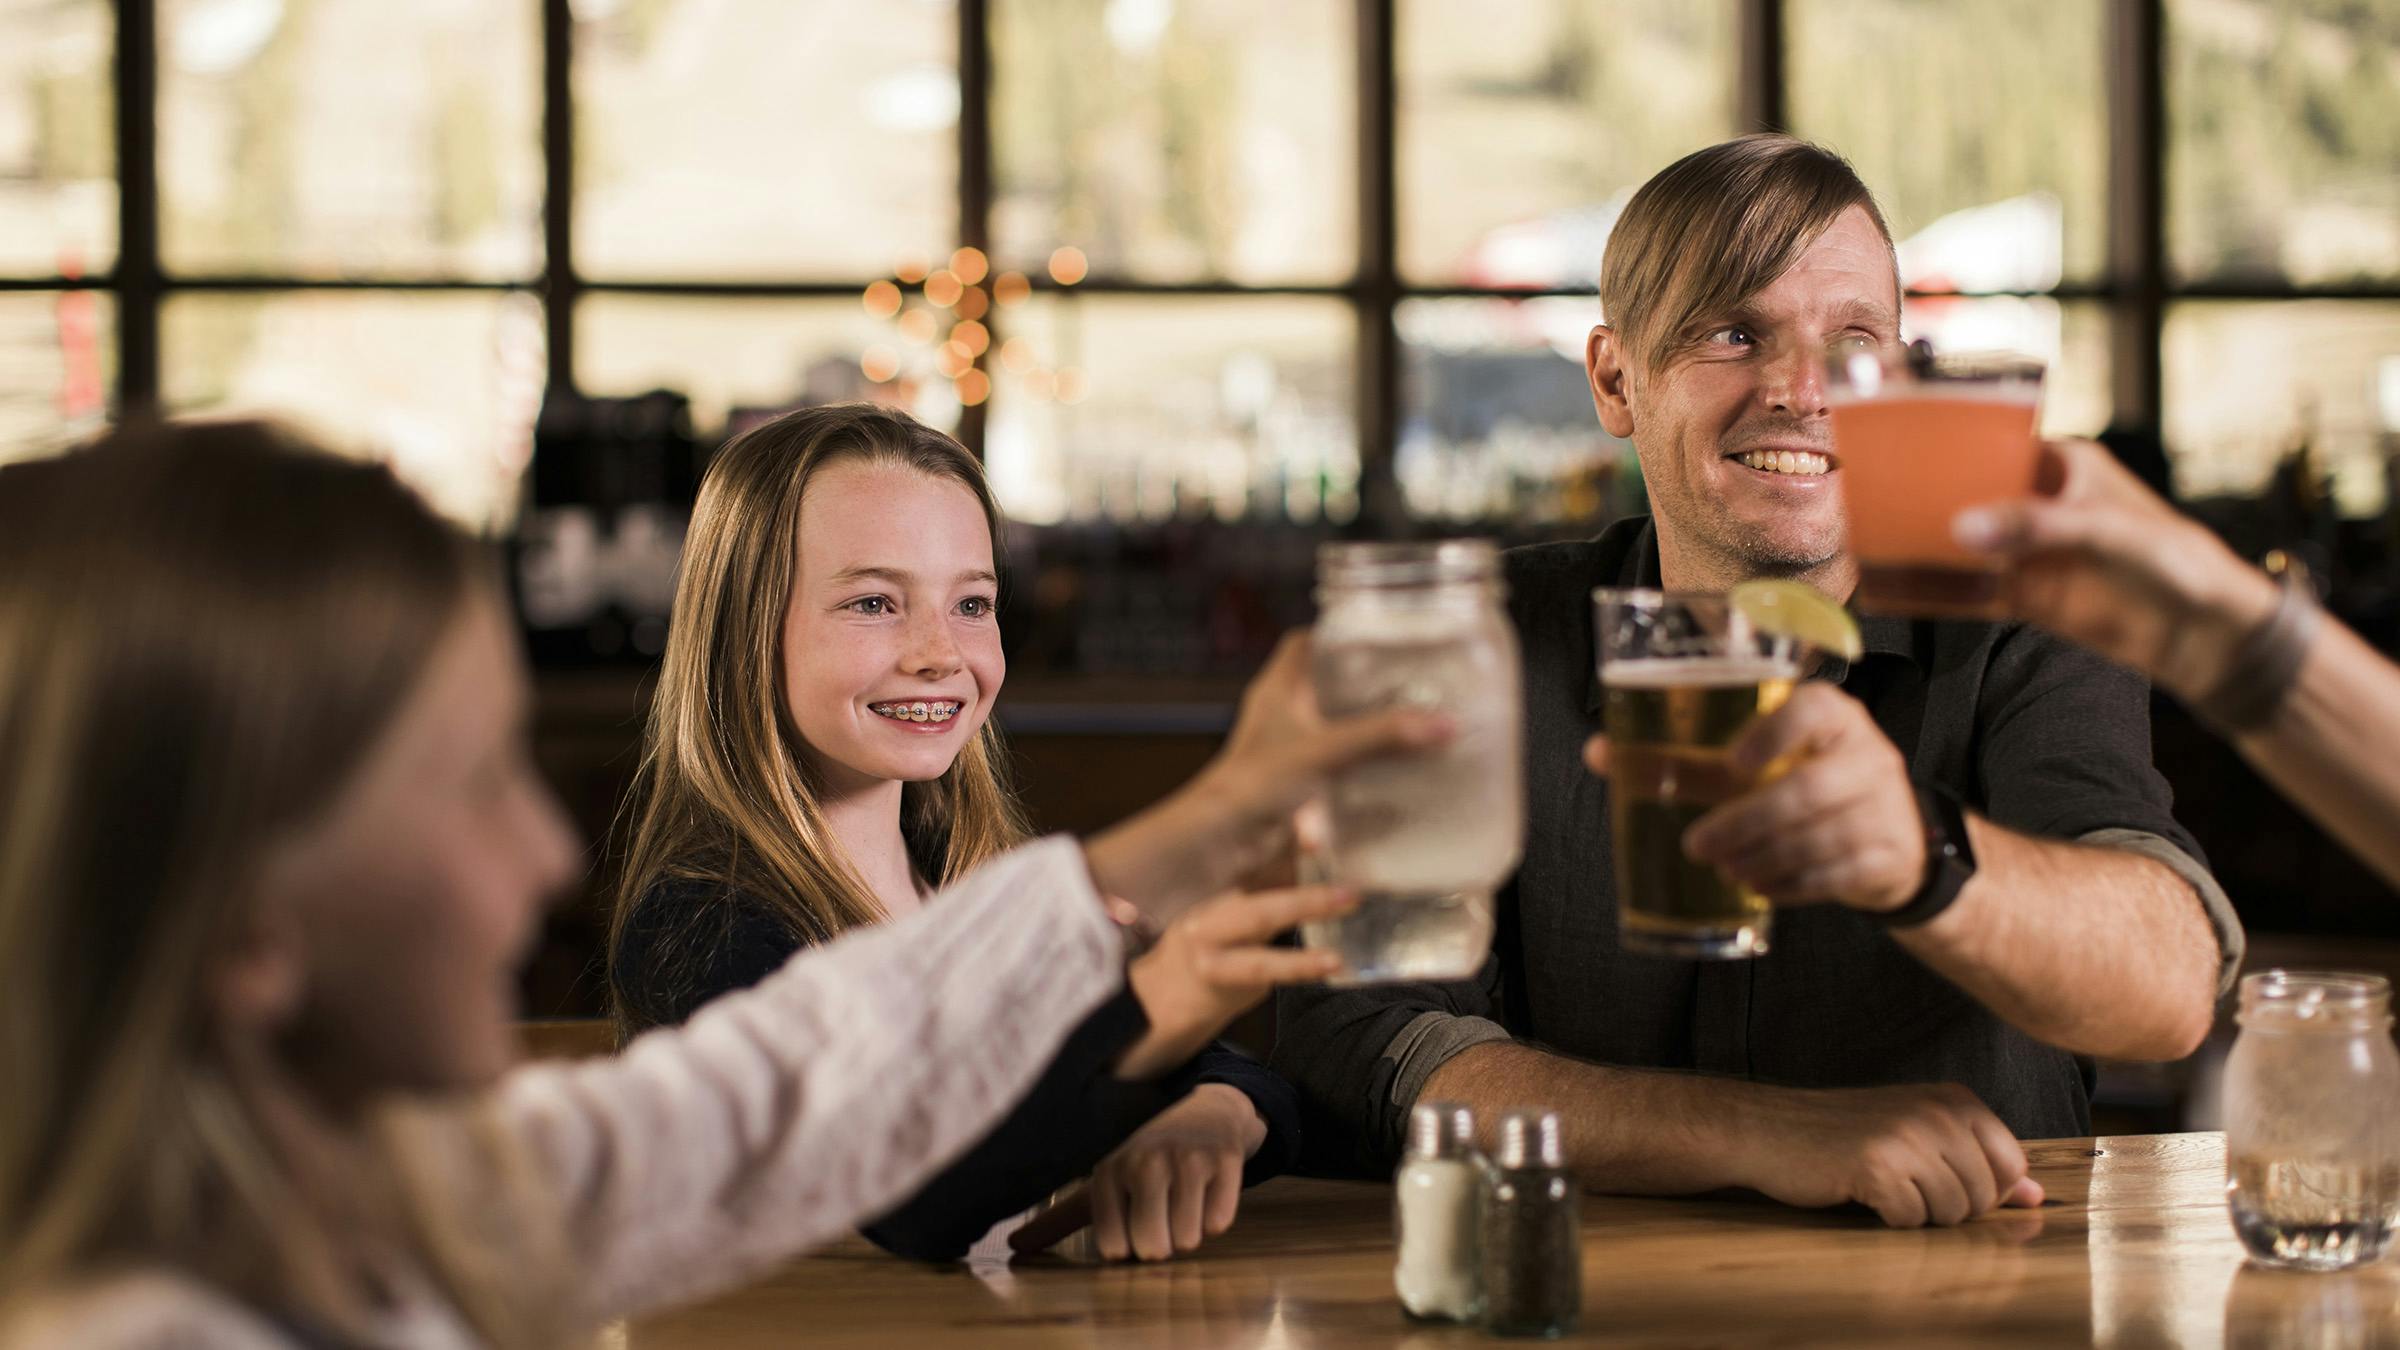 Family dining and cheers-ing drinks at Mountainside Bar and Grill